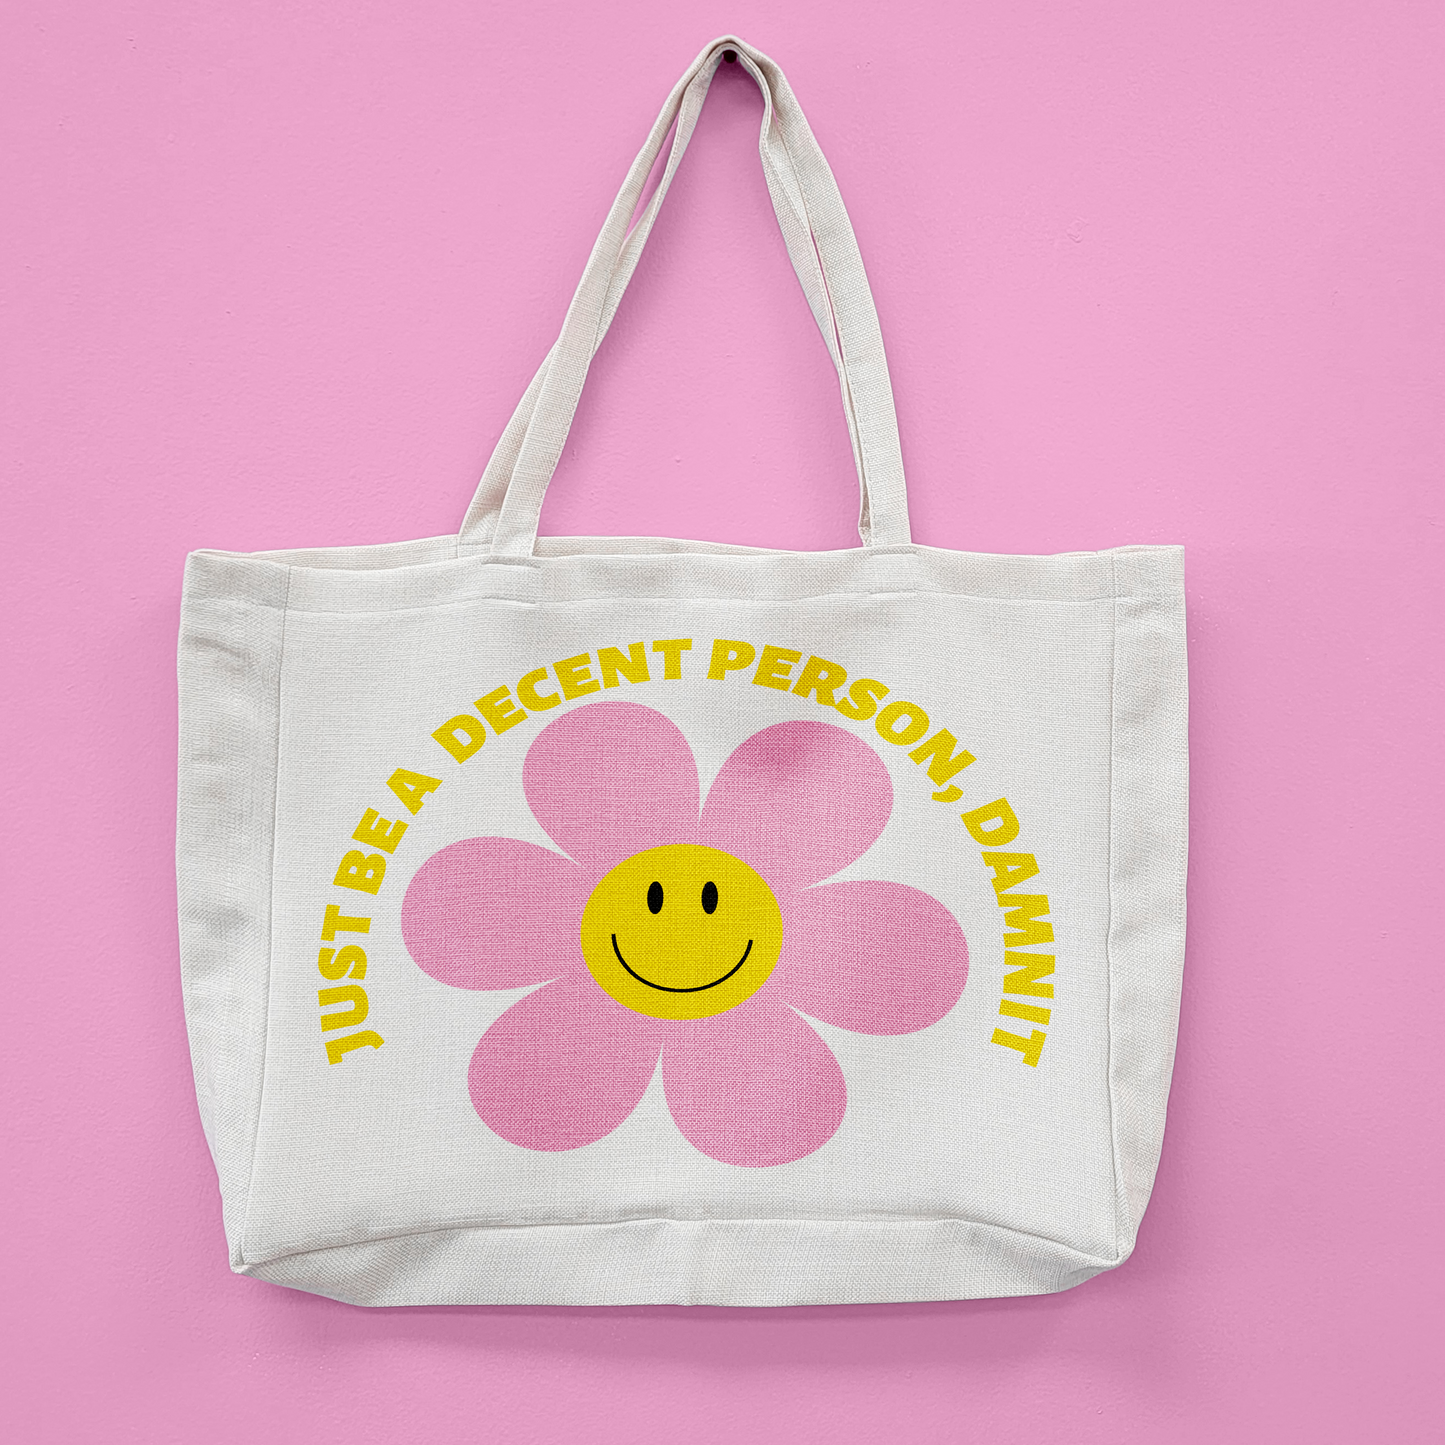 Be A Decent Person Oversized Tote Bag